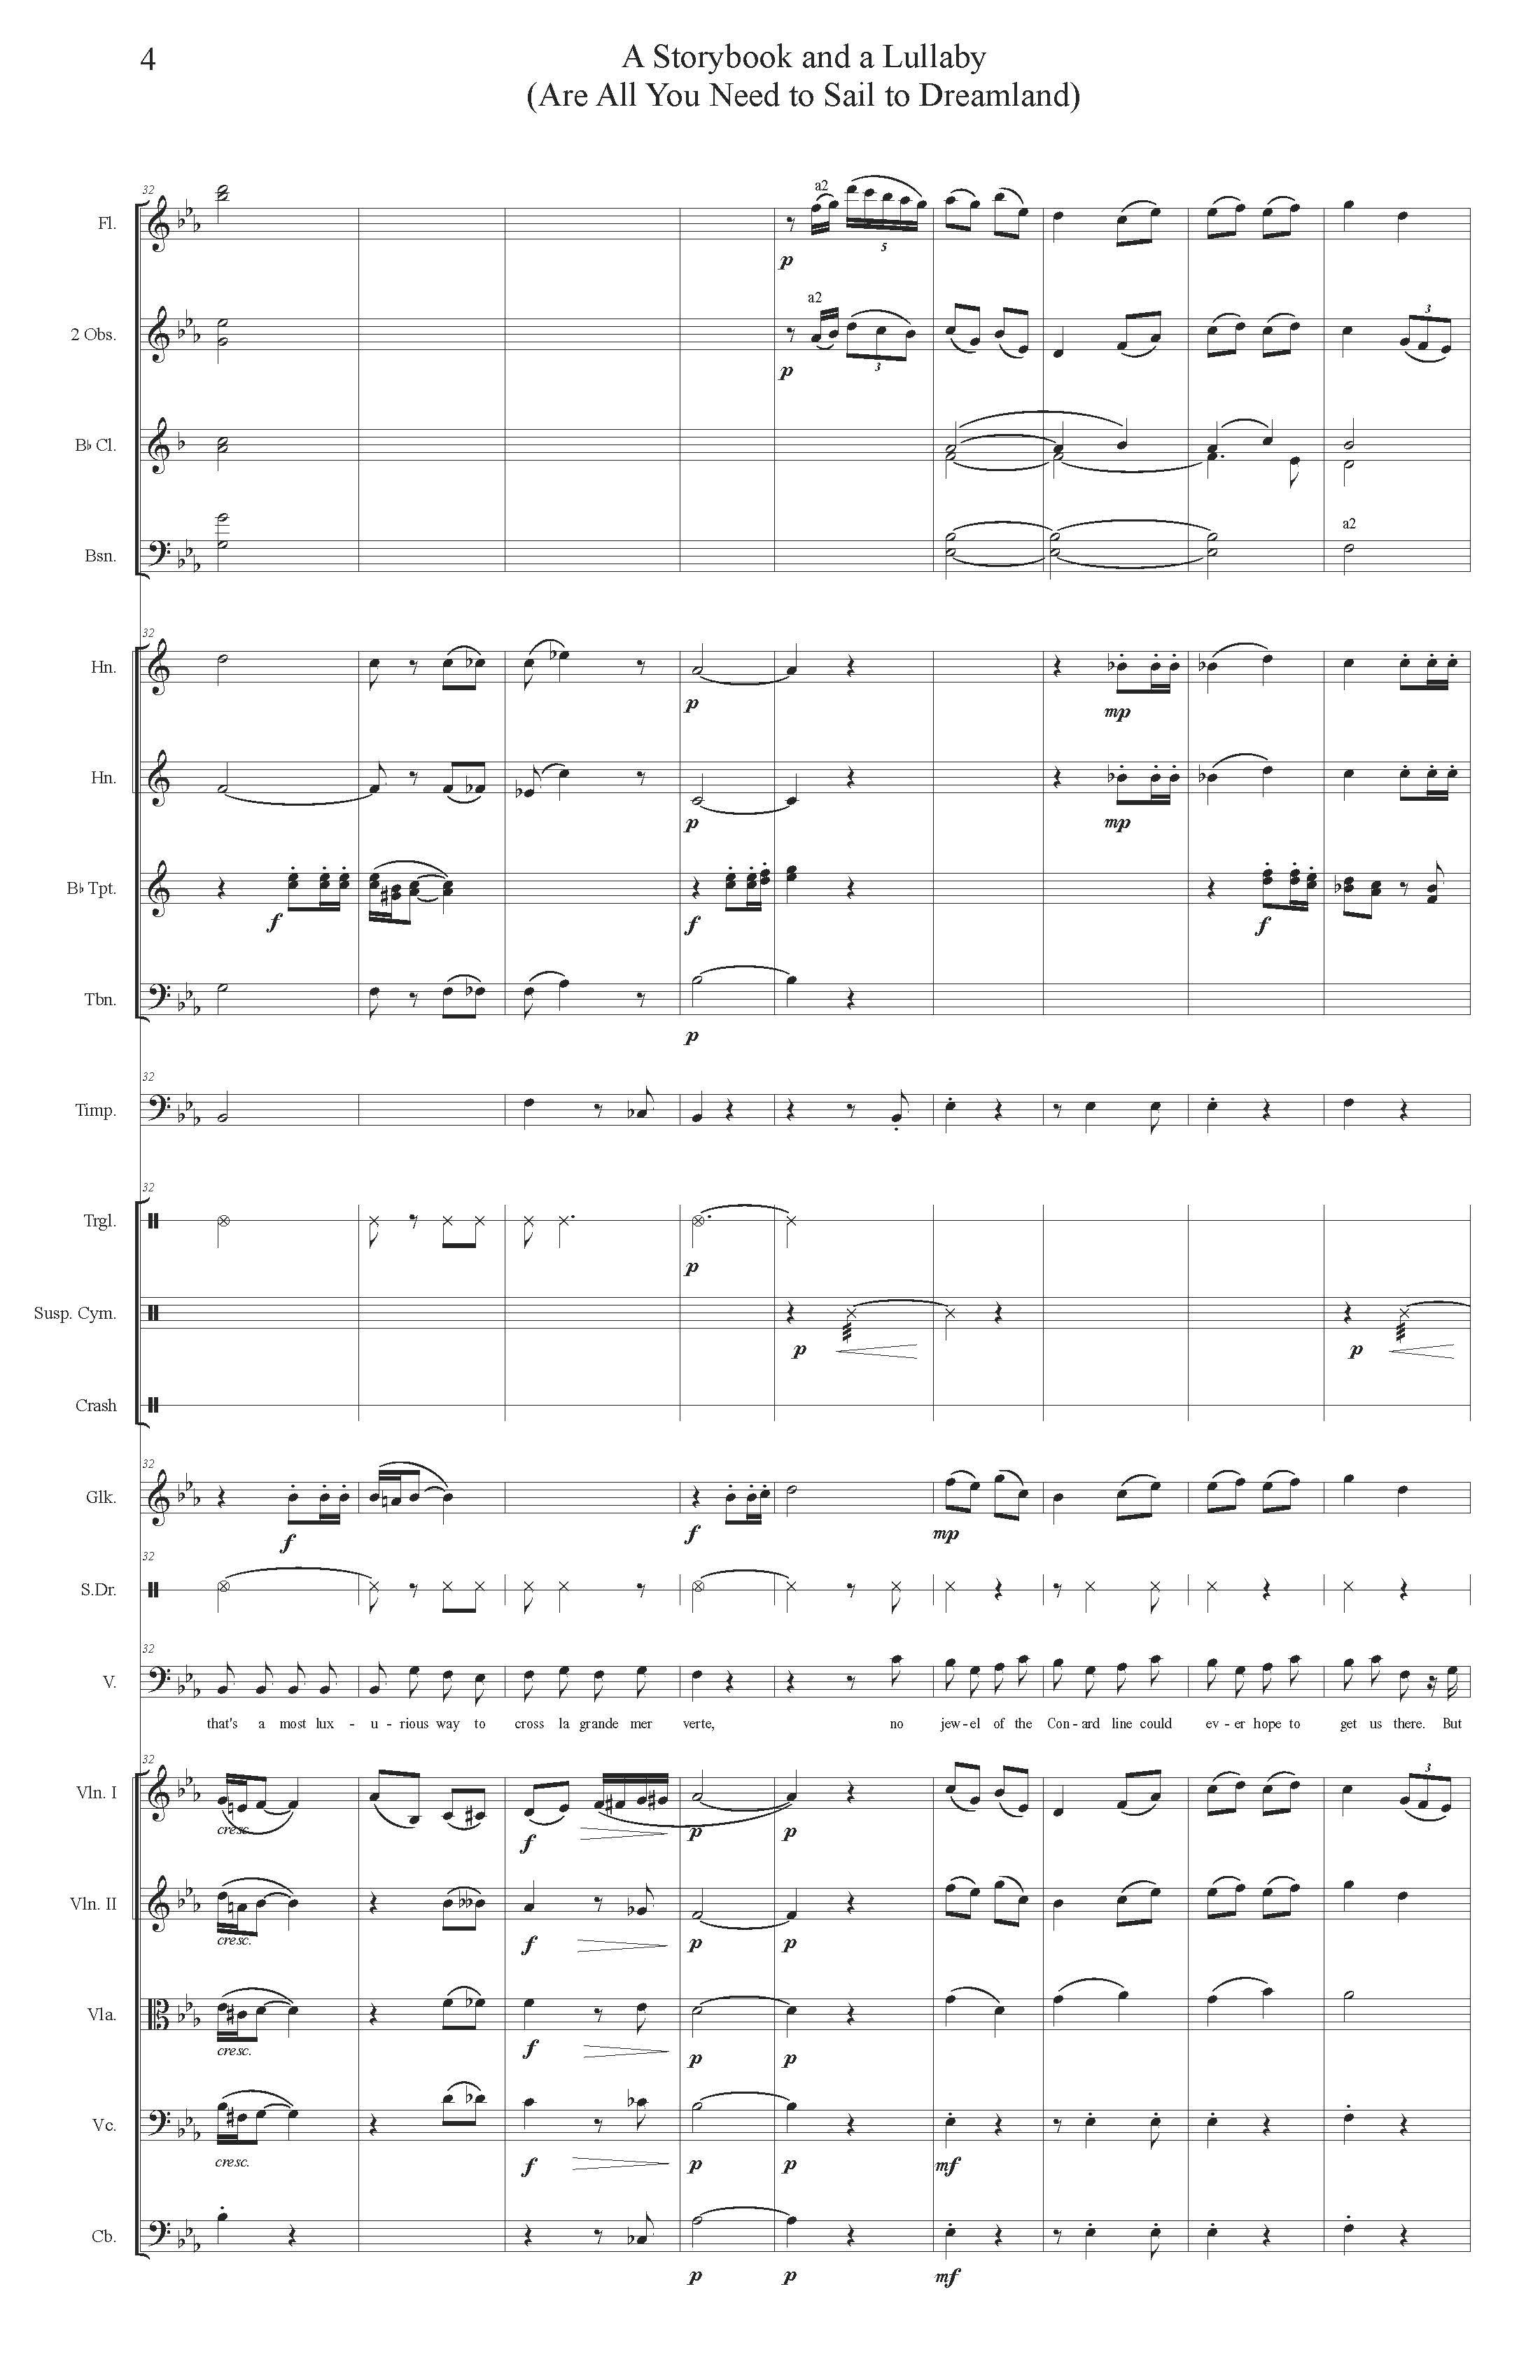 A STORYBOOK AND A LULLABY ORCH - Score_Page_04.jpg